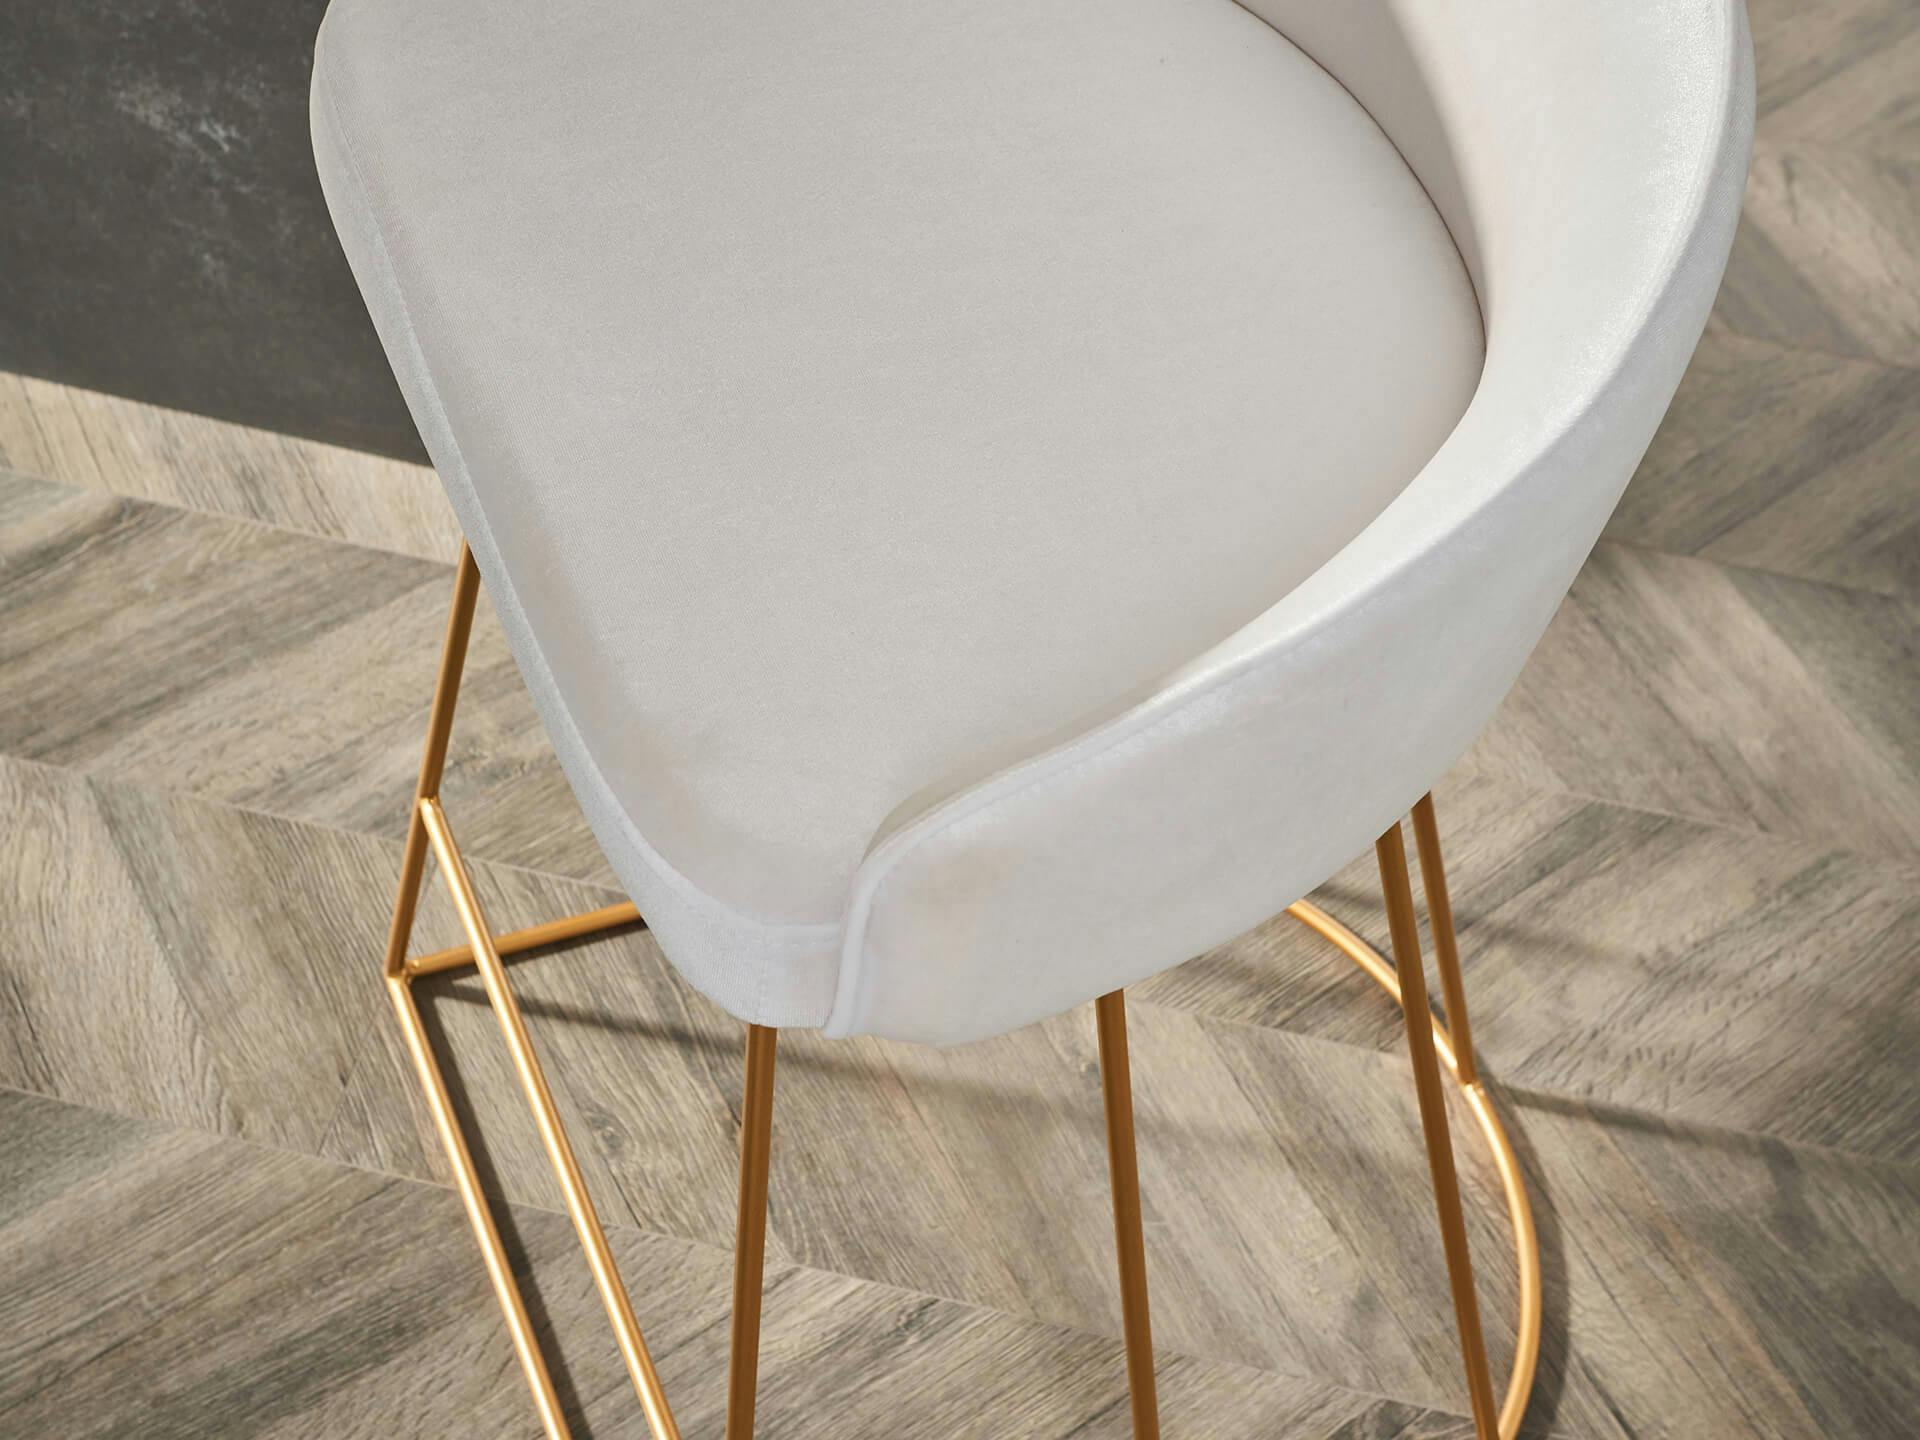 Close up of a white bar stool from above